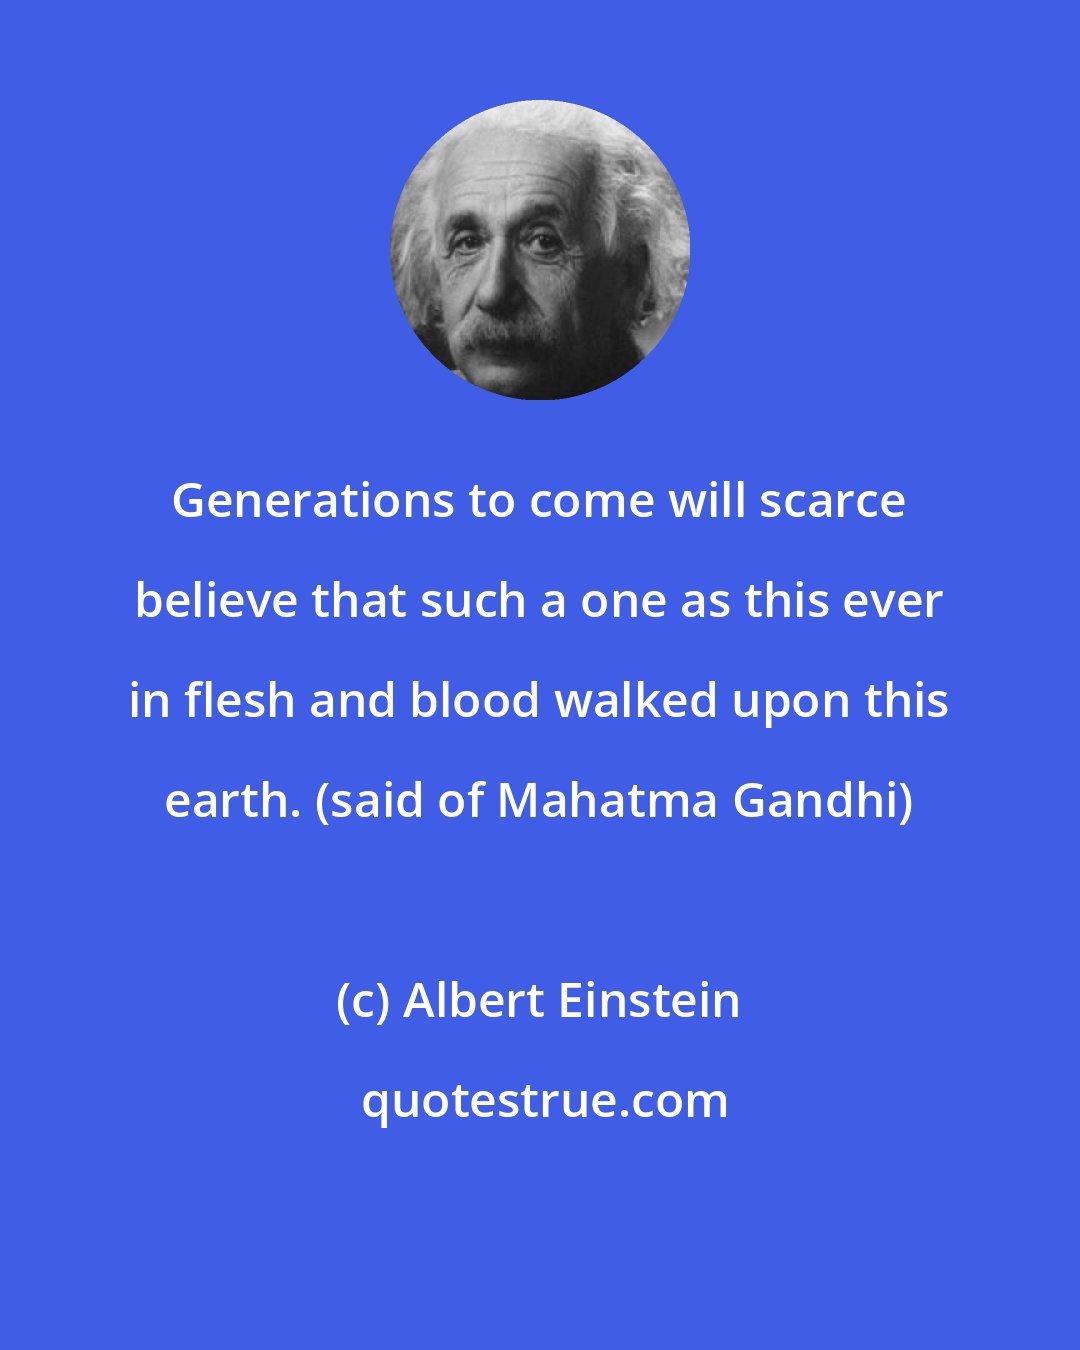 Albert Einstein: Generations to come will scarce believe that such a one as this ever in flesh and blood walked upon this earth. (said of Mahatma Gandhi)